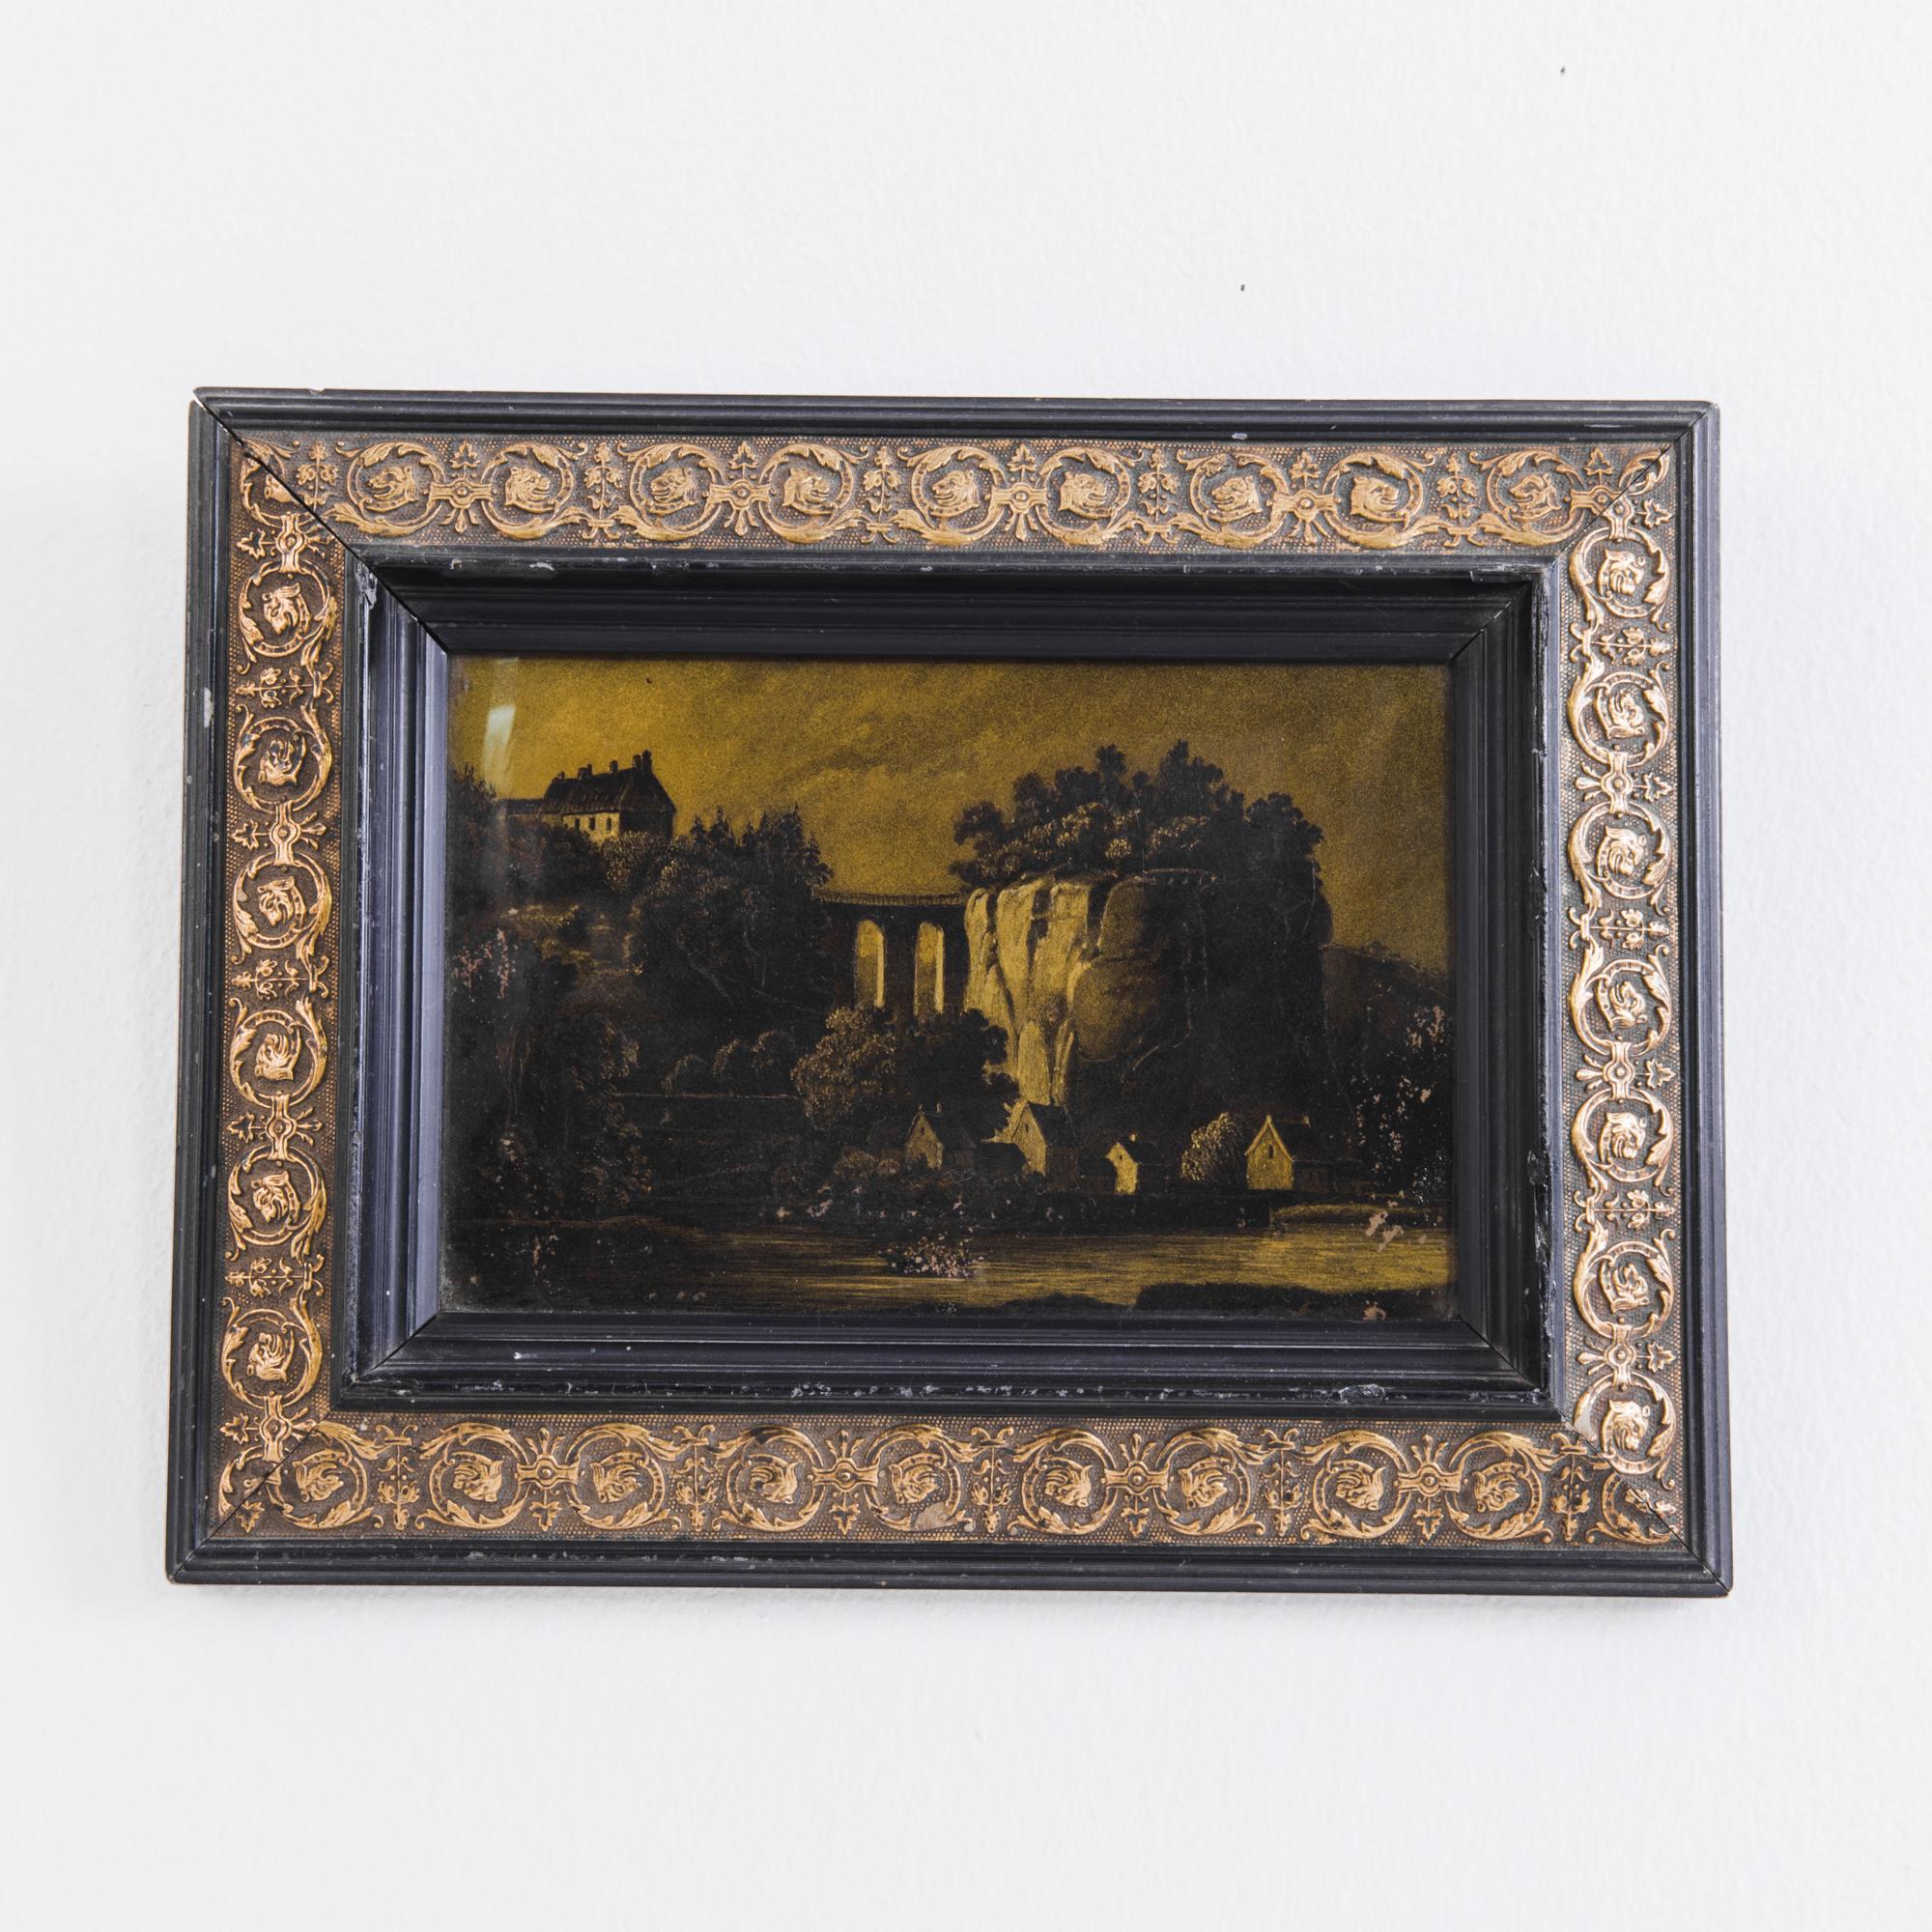 A landscape painting with giltwood frame from France, circa 1880. A scene depicting a village and cliff, rendering in an earthy ochre, is elaborated by a floral giltwood frame.